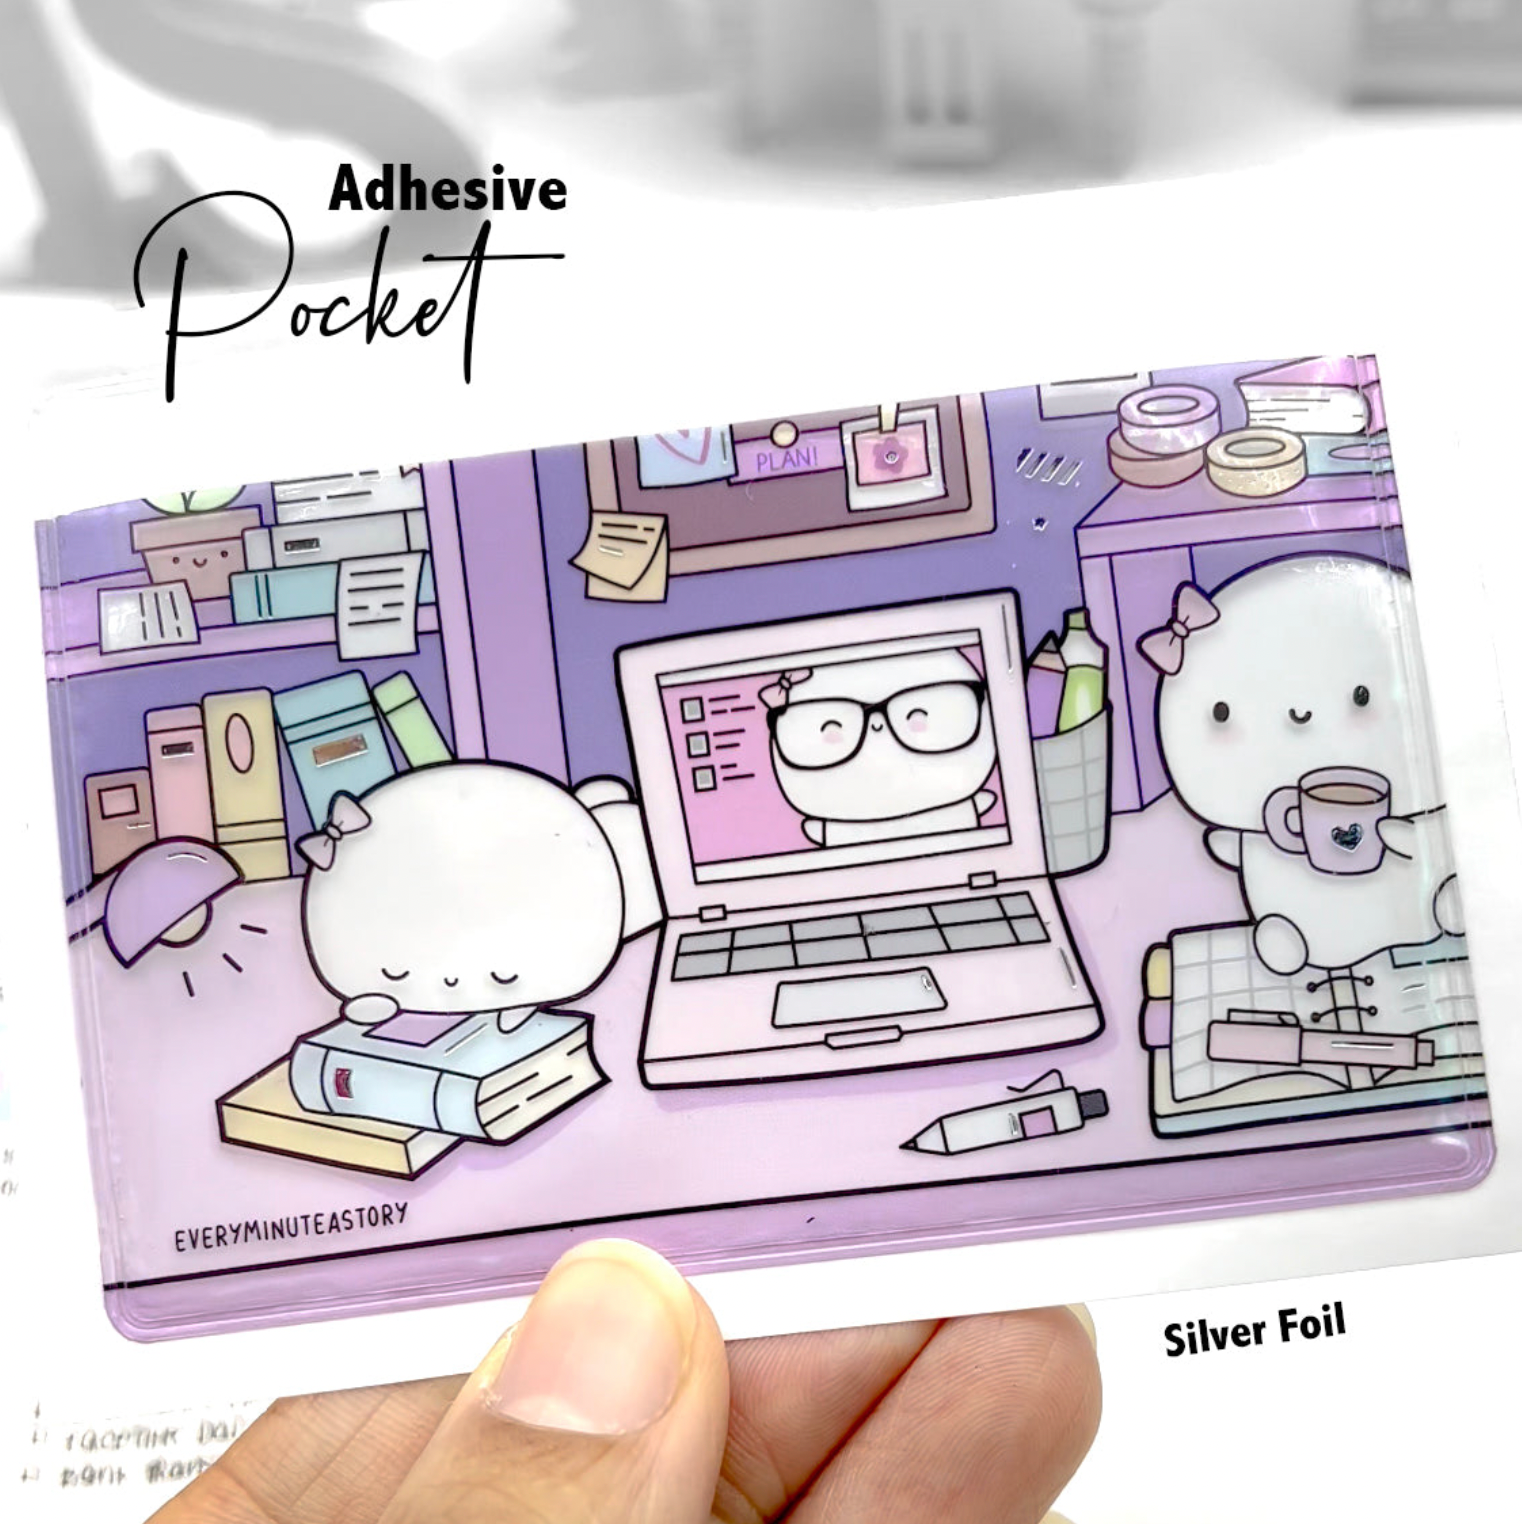 Beanie's work desk adhesive pocket - Low stock! Limit 2/order